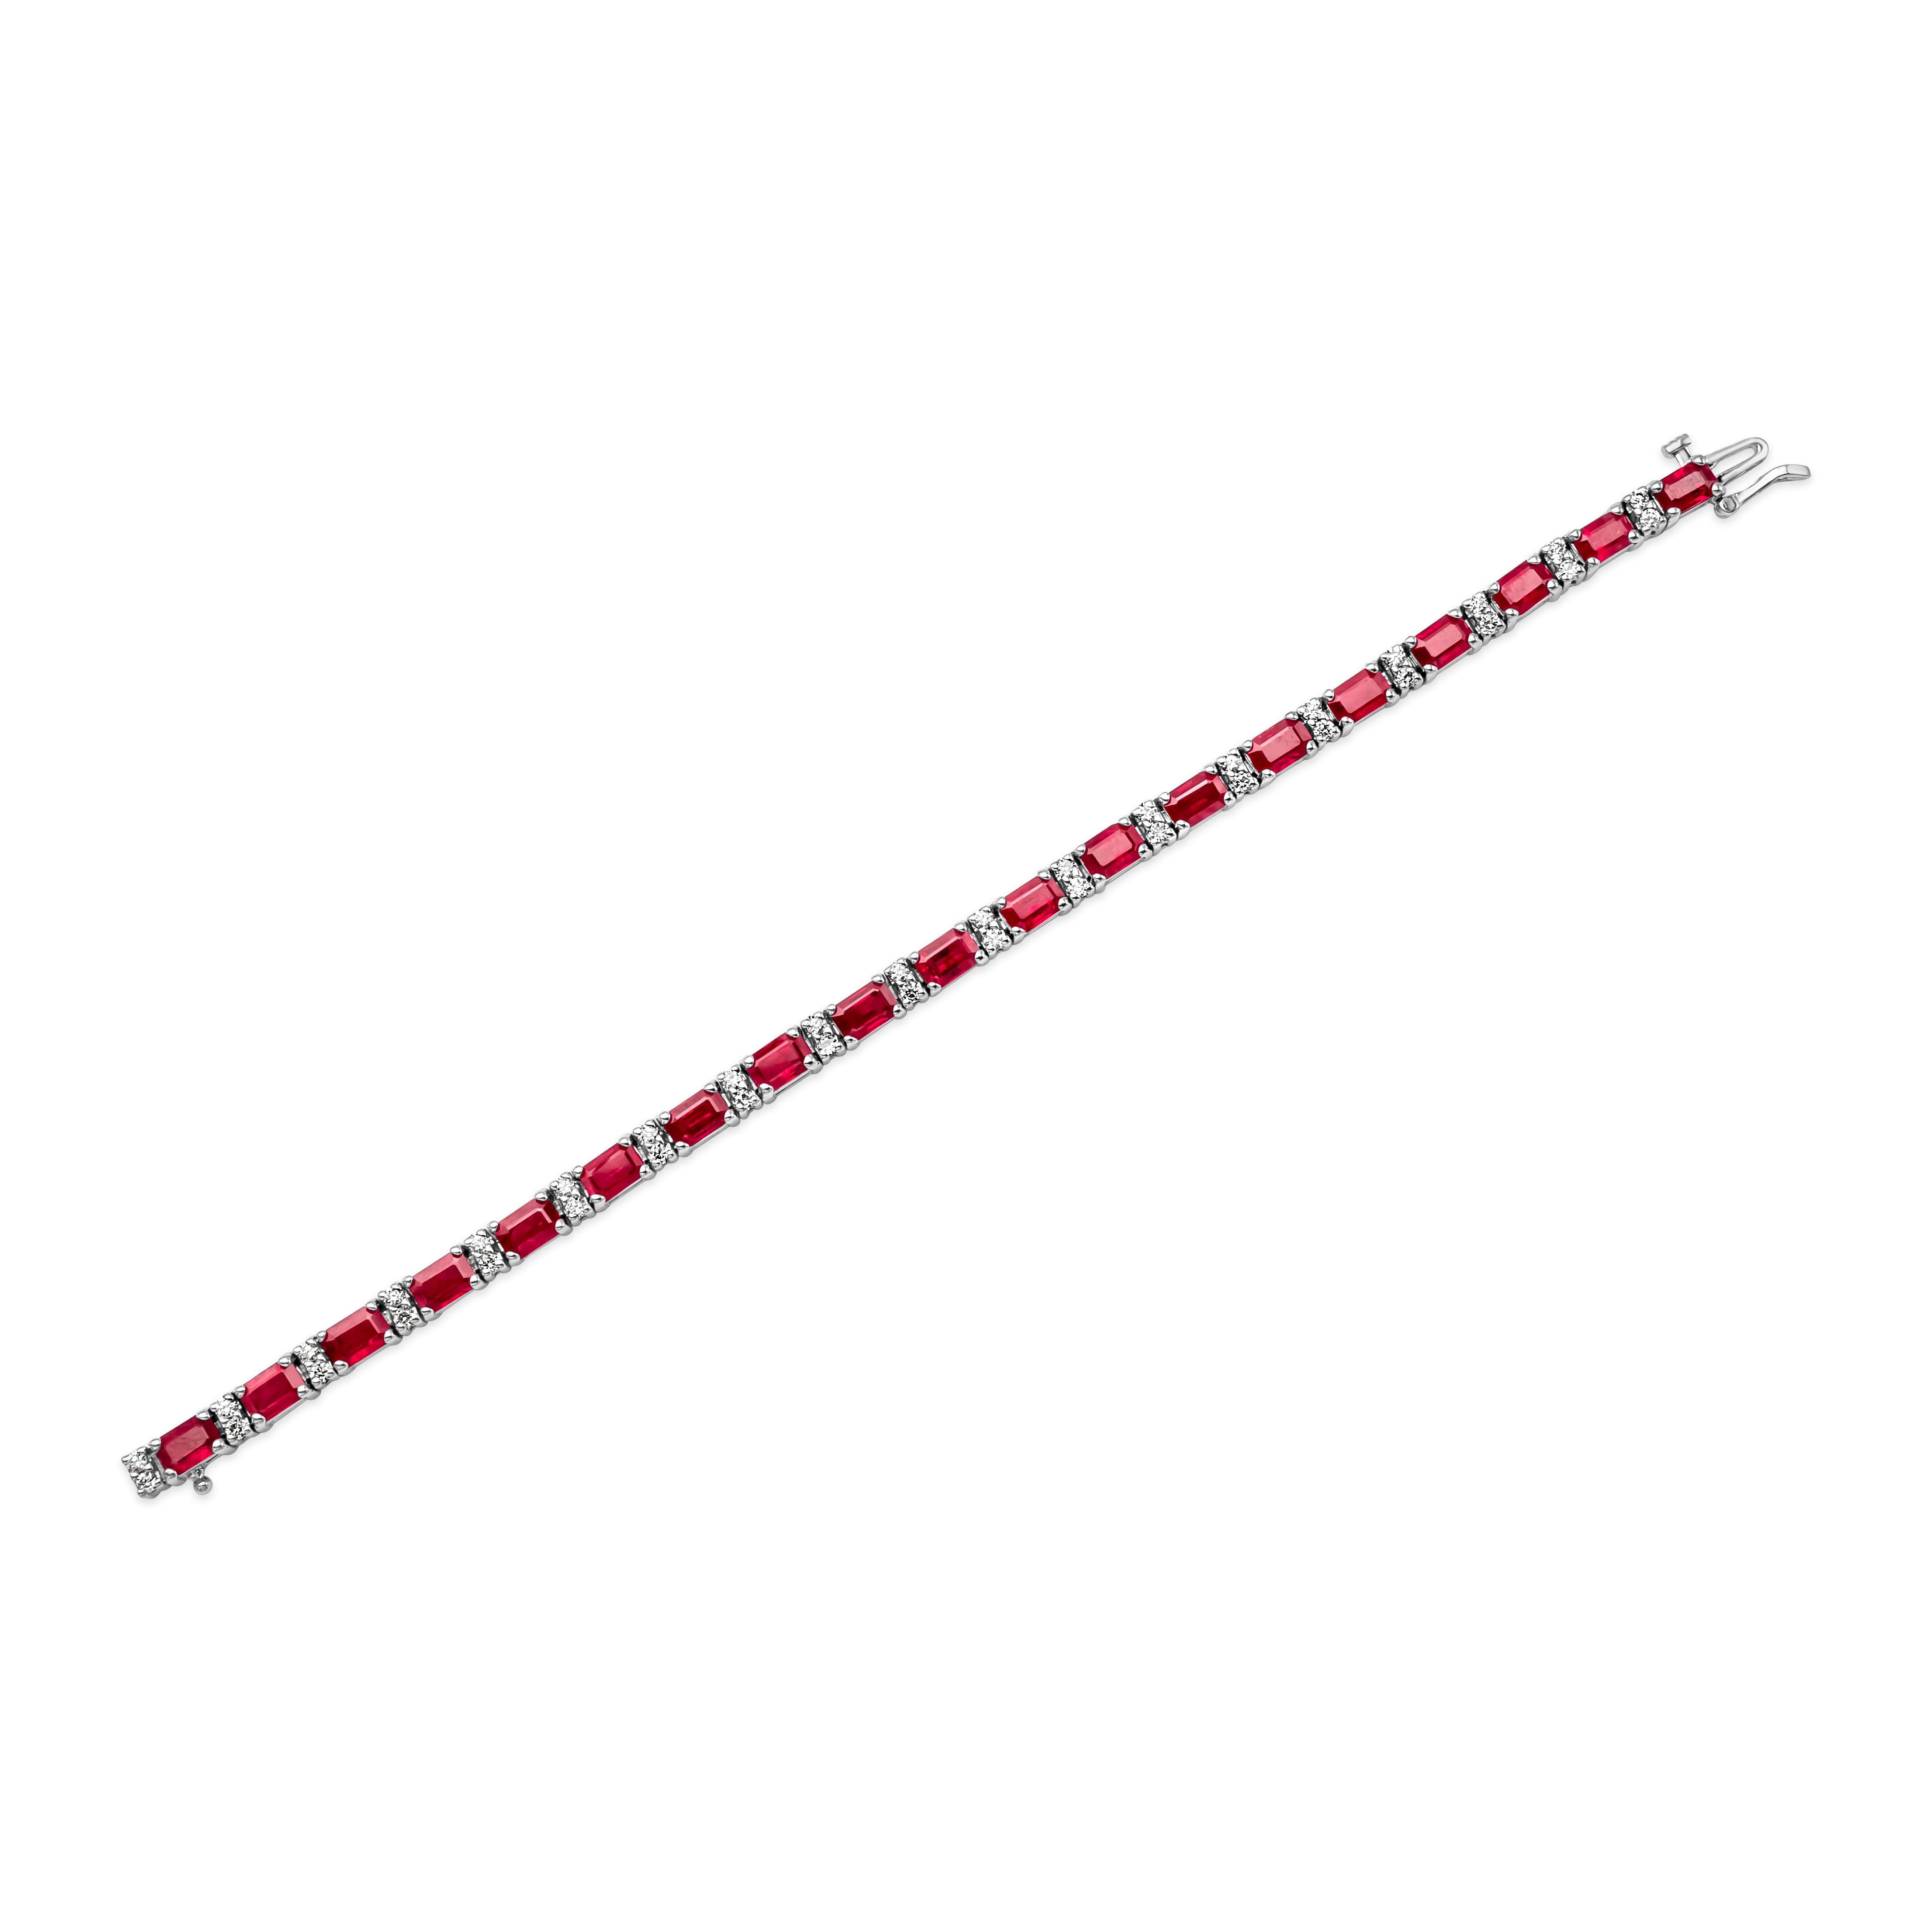 Roman Malakov 12.33 Carat Emerald Cut Burmese Ruby with Diamond Tennis Bracelet In New Condition For Sale In New York, NY